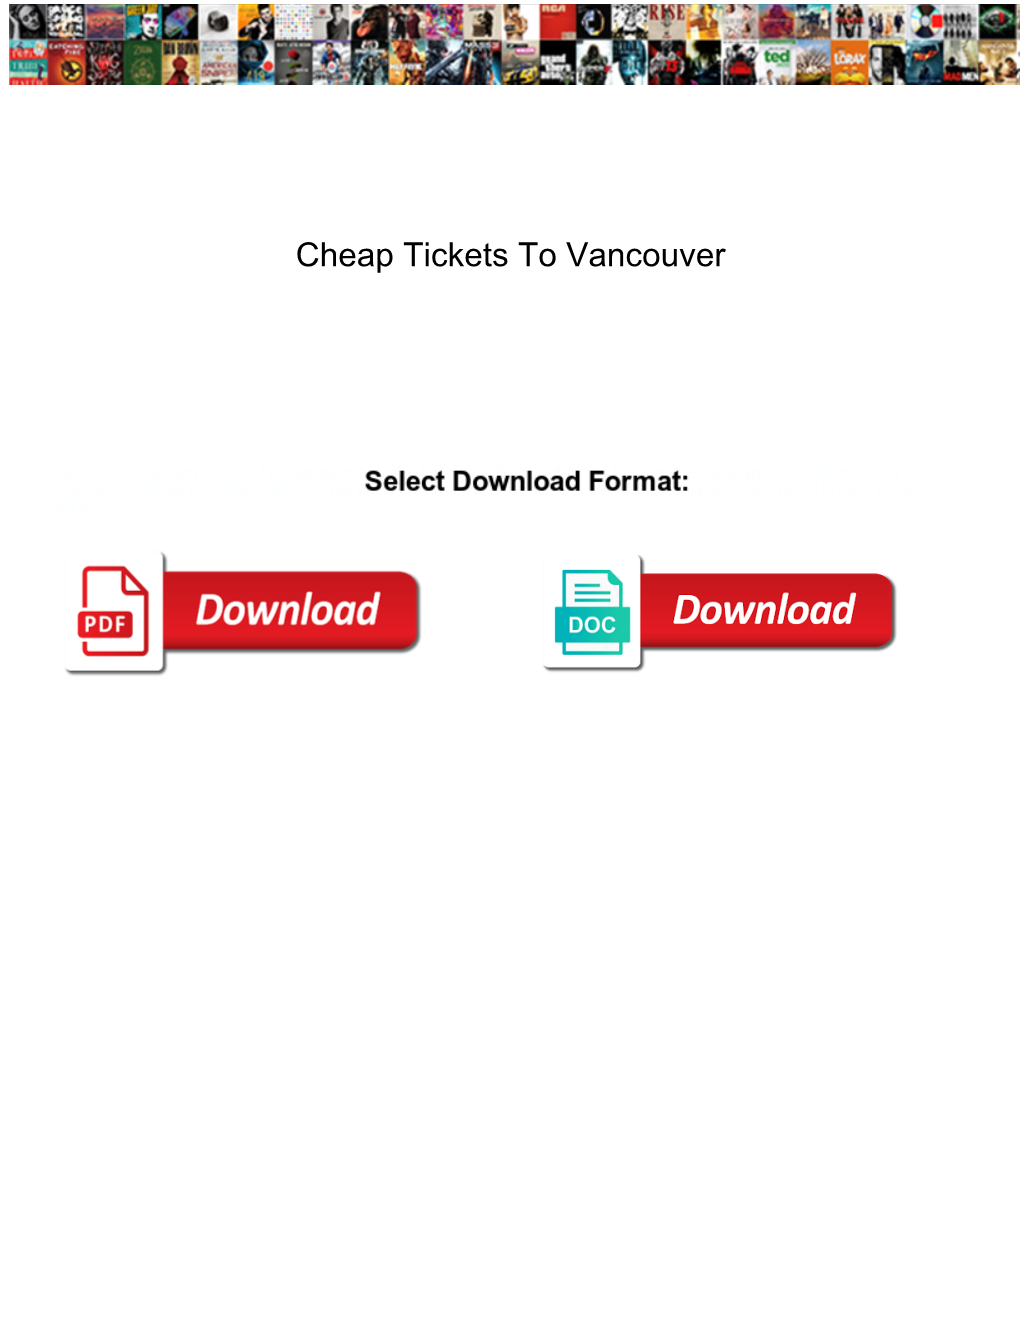 Cheap Tickets to Vancouver